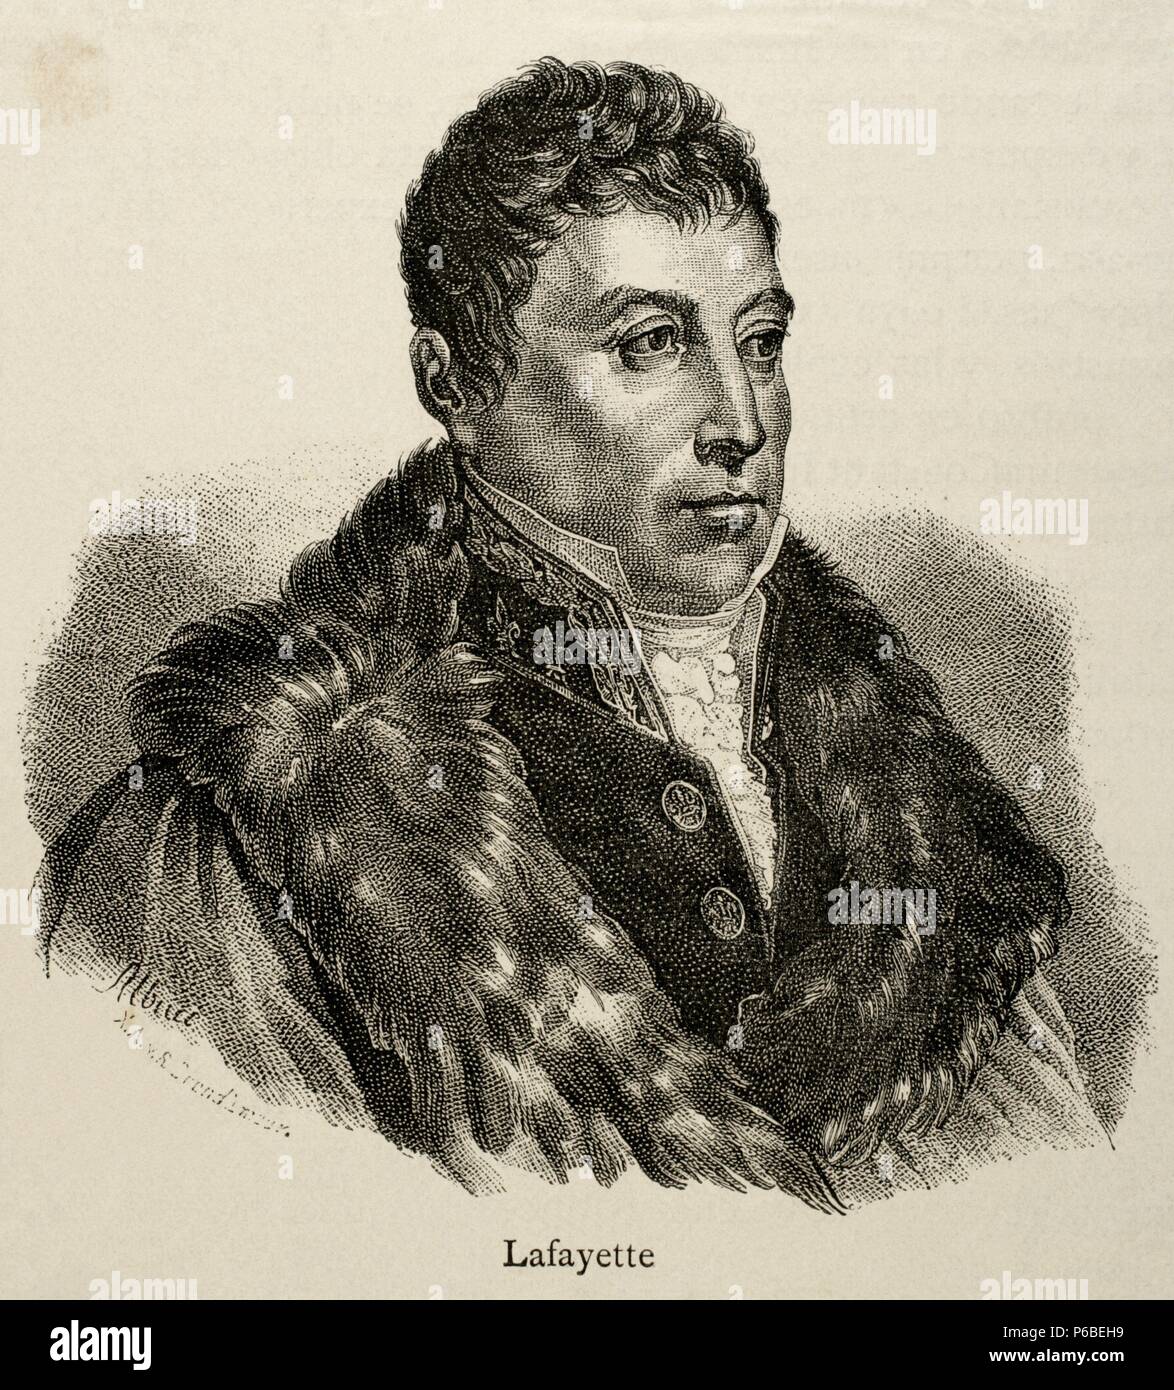 Marquis of La Fayette (1757-1834). French military and politician. Engraving. History of France, 1883. Stock Photo